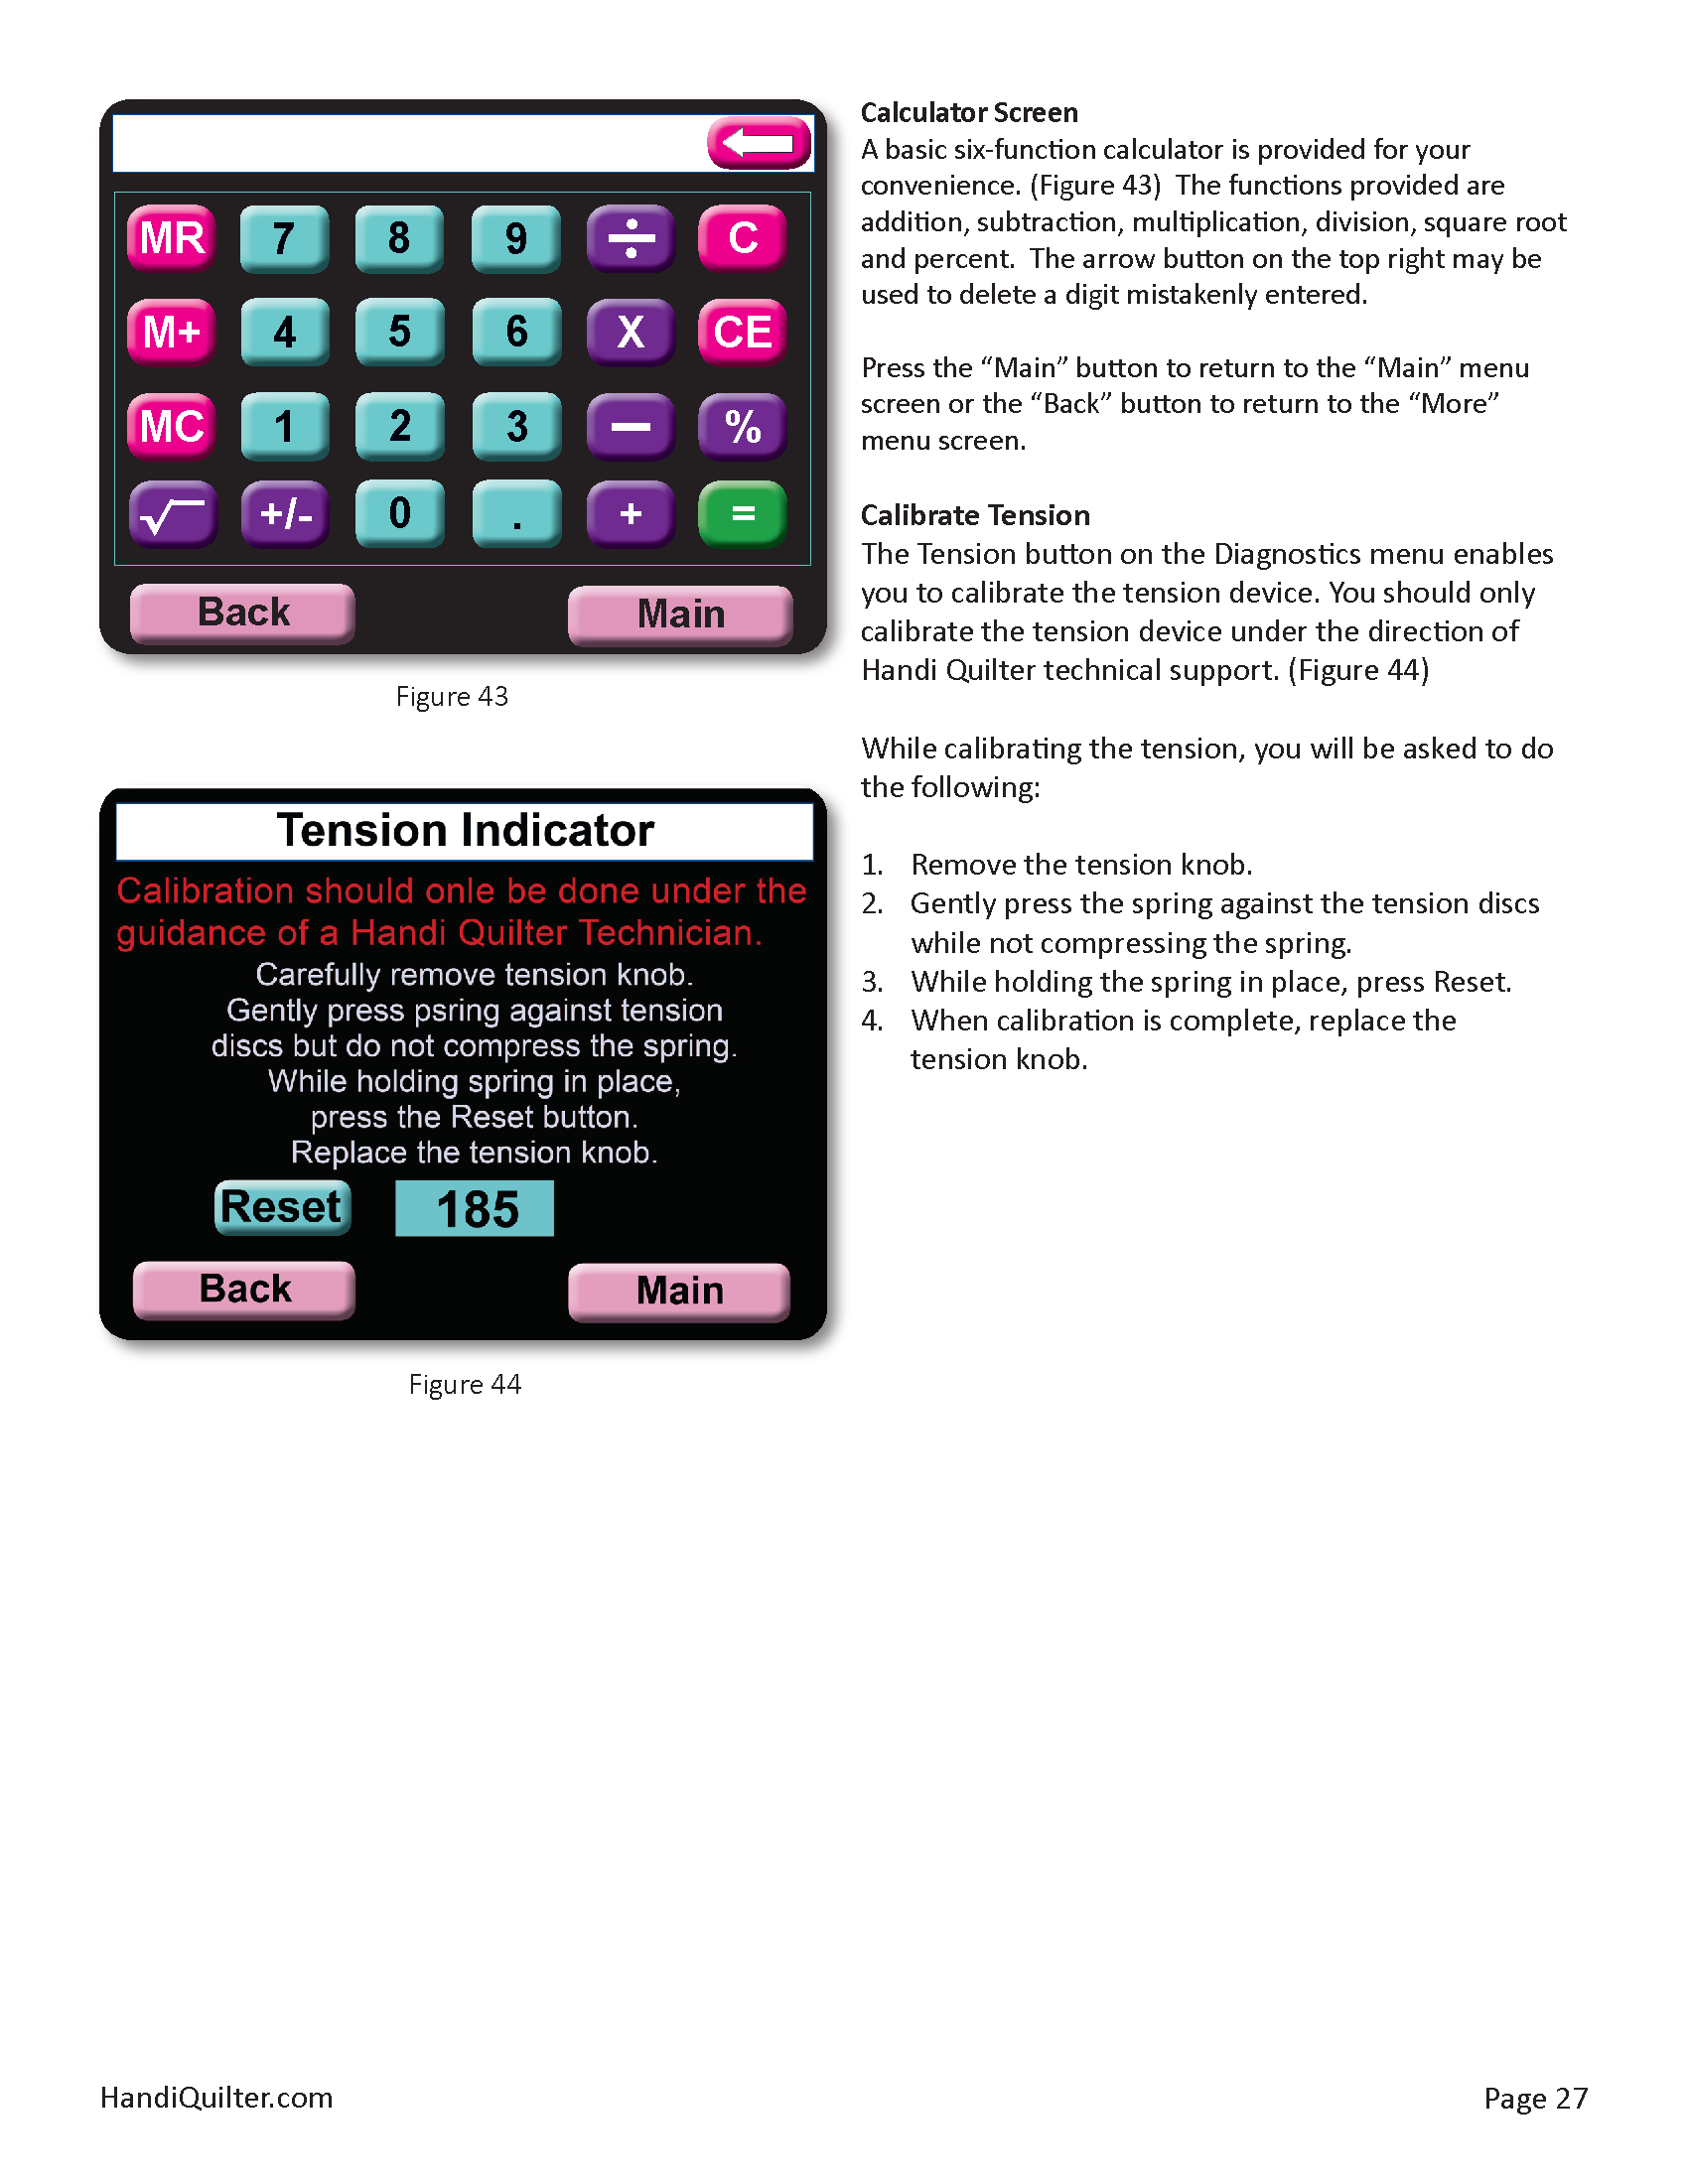 HQ-Sweet-Sixteen-User-Manual-V3.1_Page_28.png